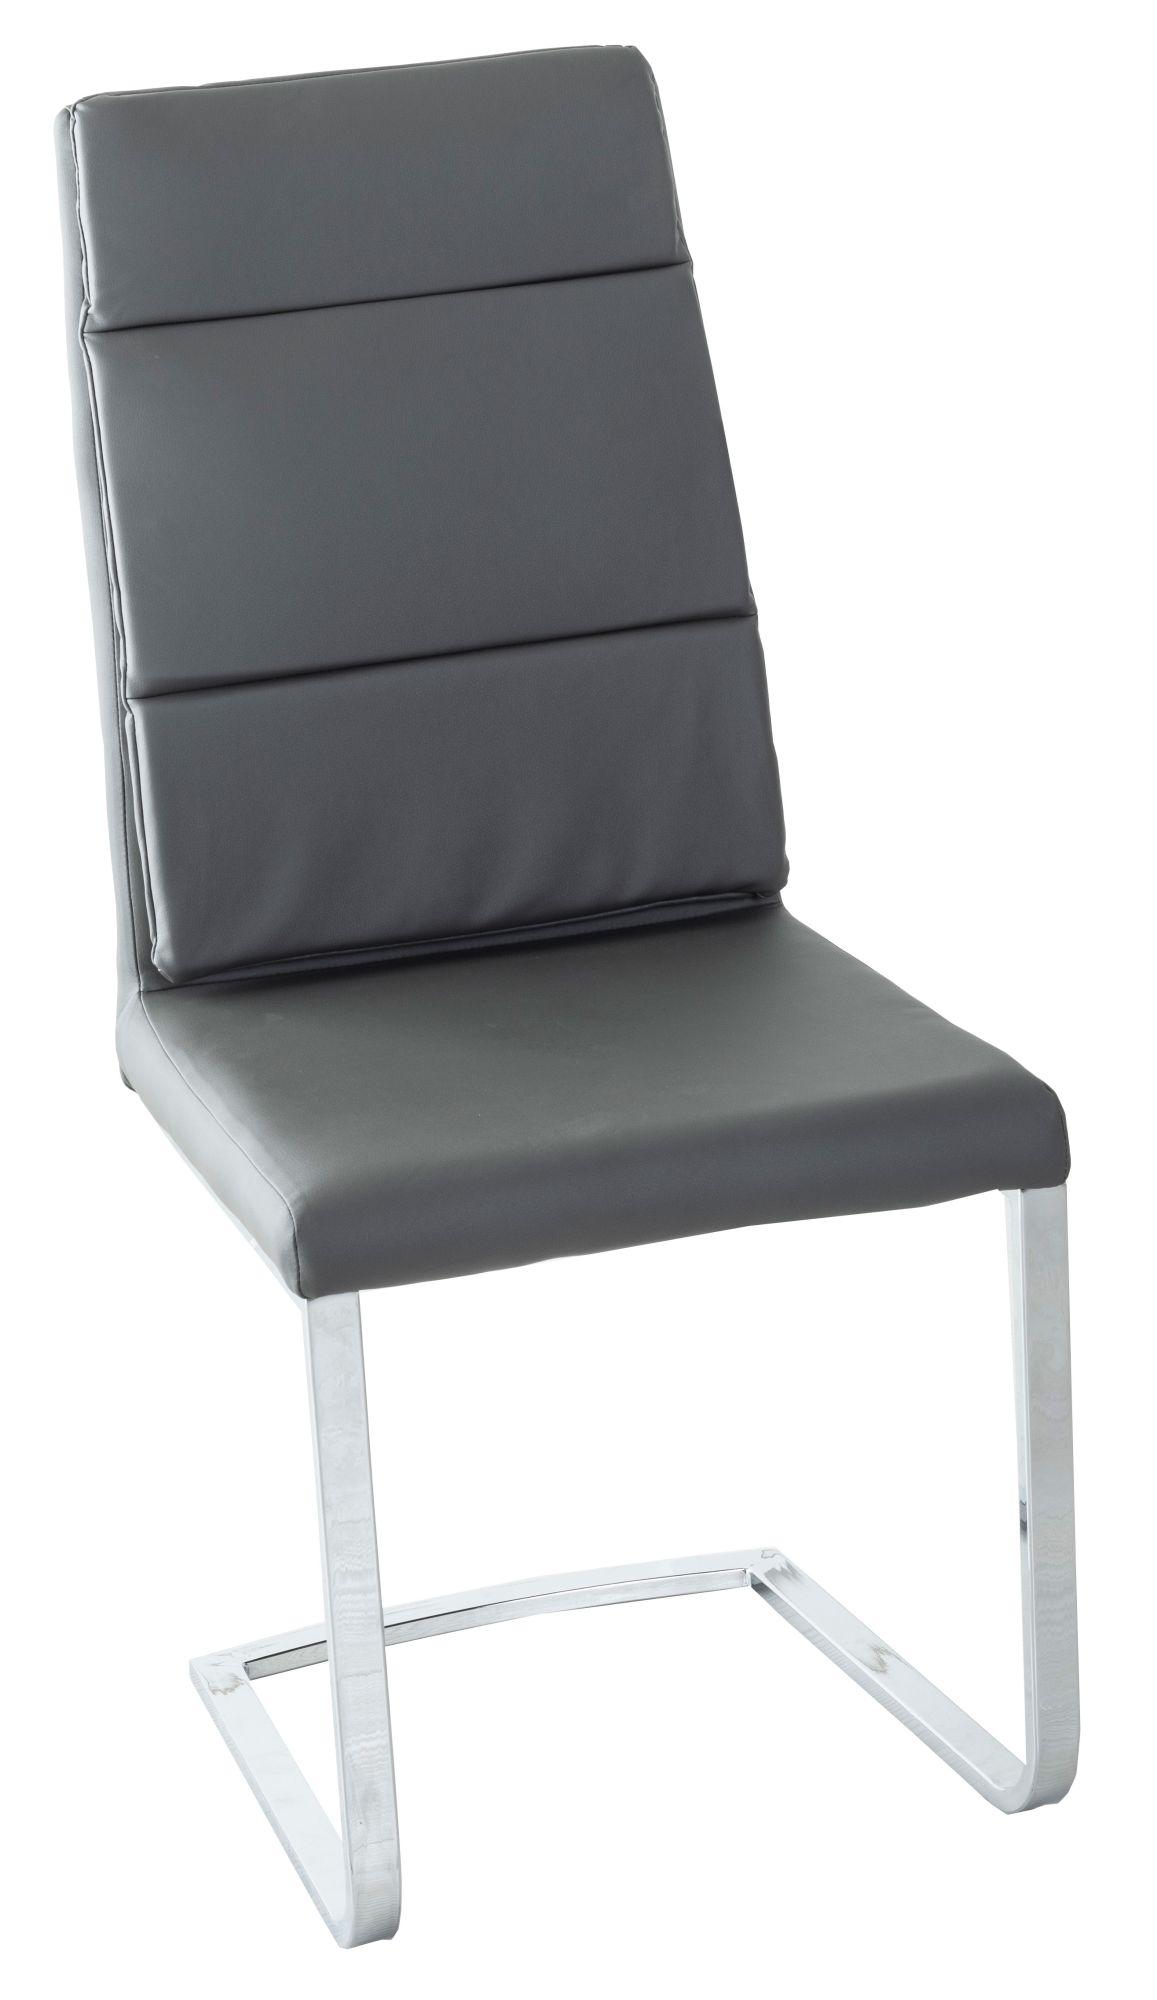 Arabella Dark Grey Dining Chair, Leather - Faux PU with Stainless Steel Chrome Cantiliver Base